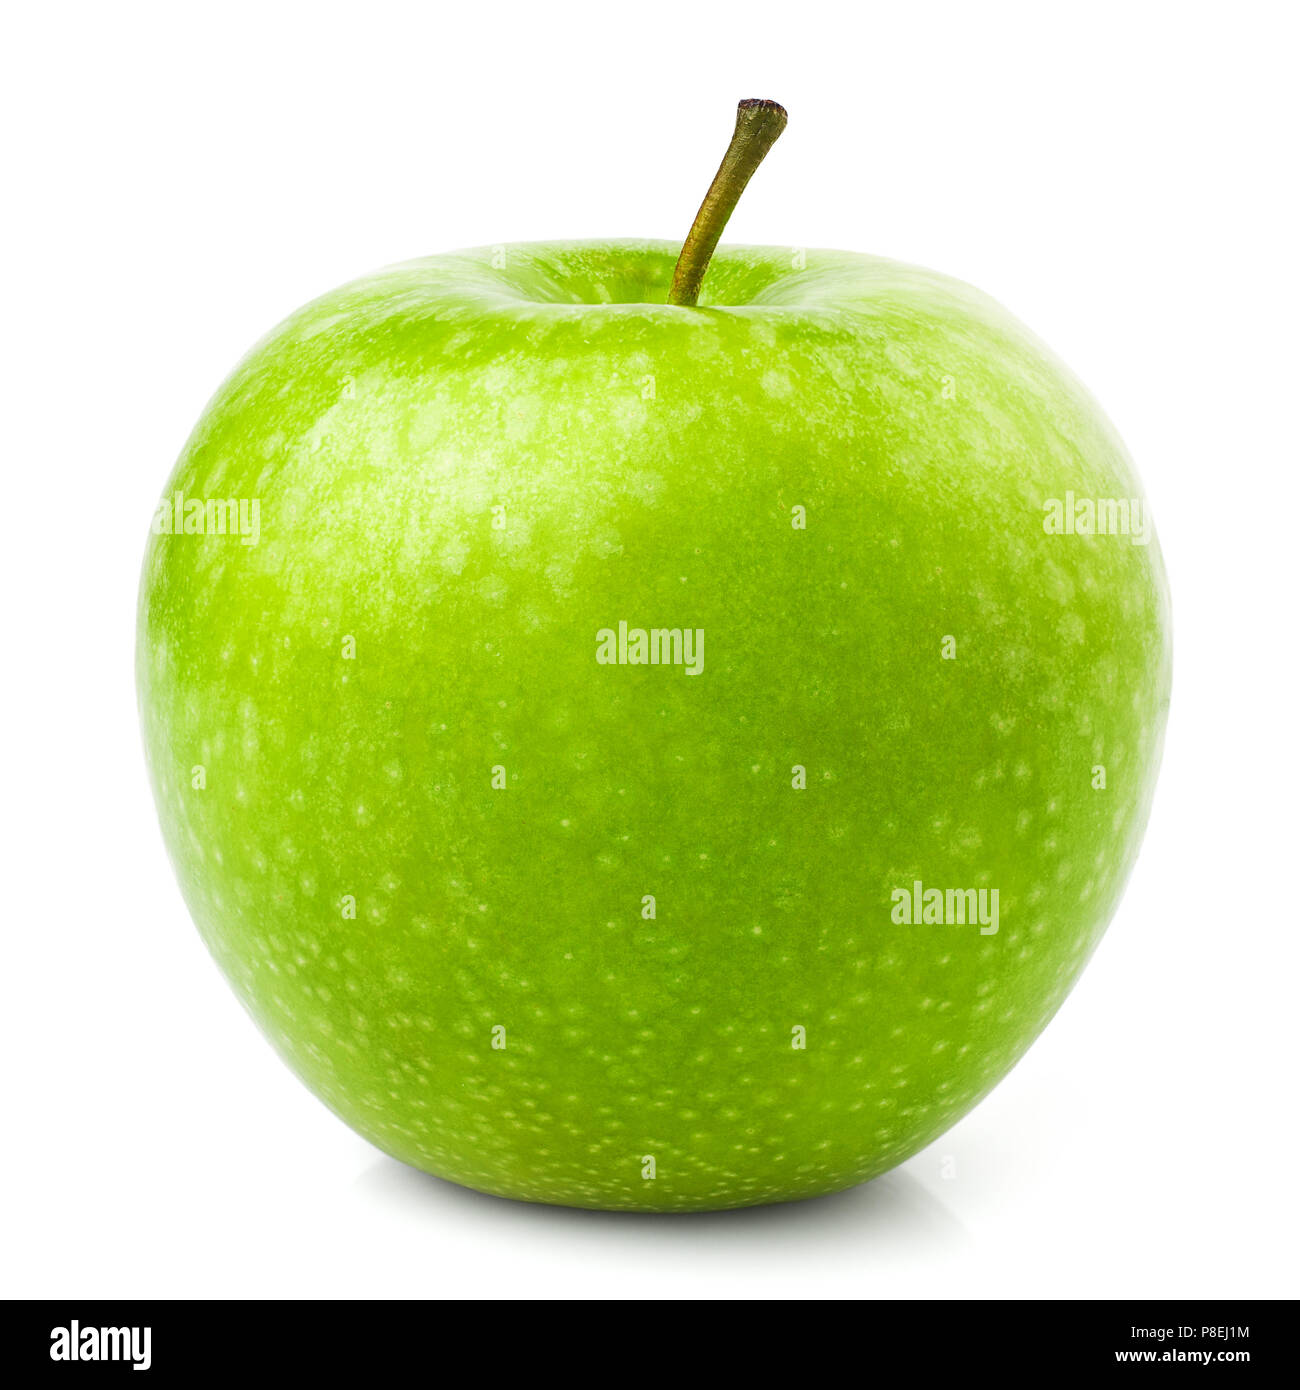 Green juicy shiny apple on white background, isolated, high qual Stock Photo